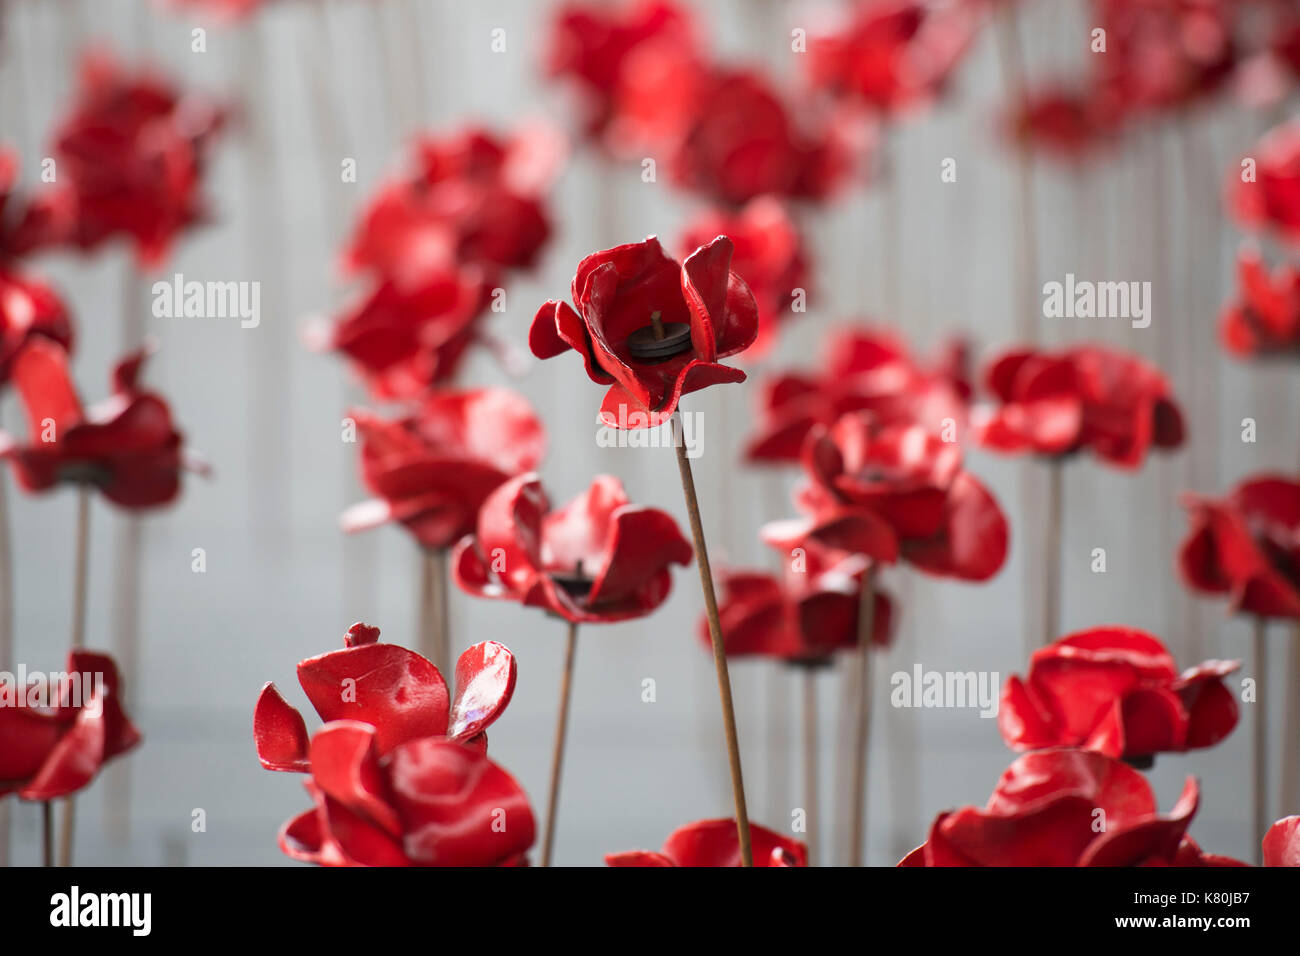 The Weeping Window installation at the Senedd Stock Photo